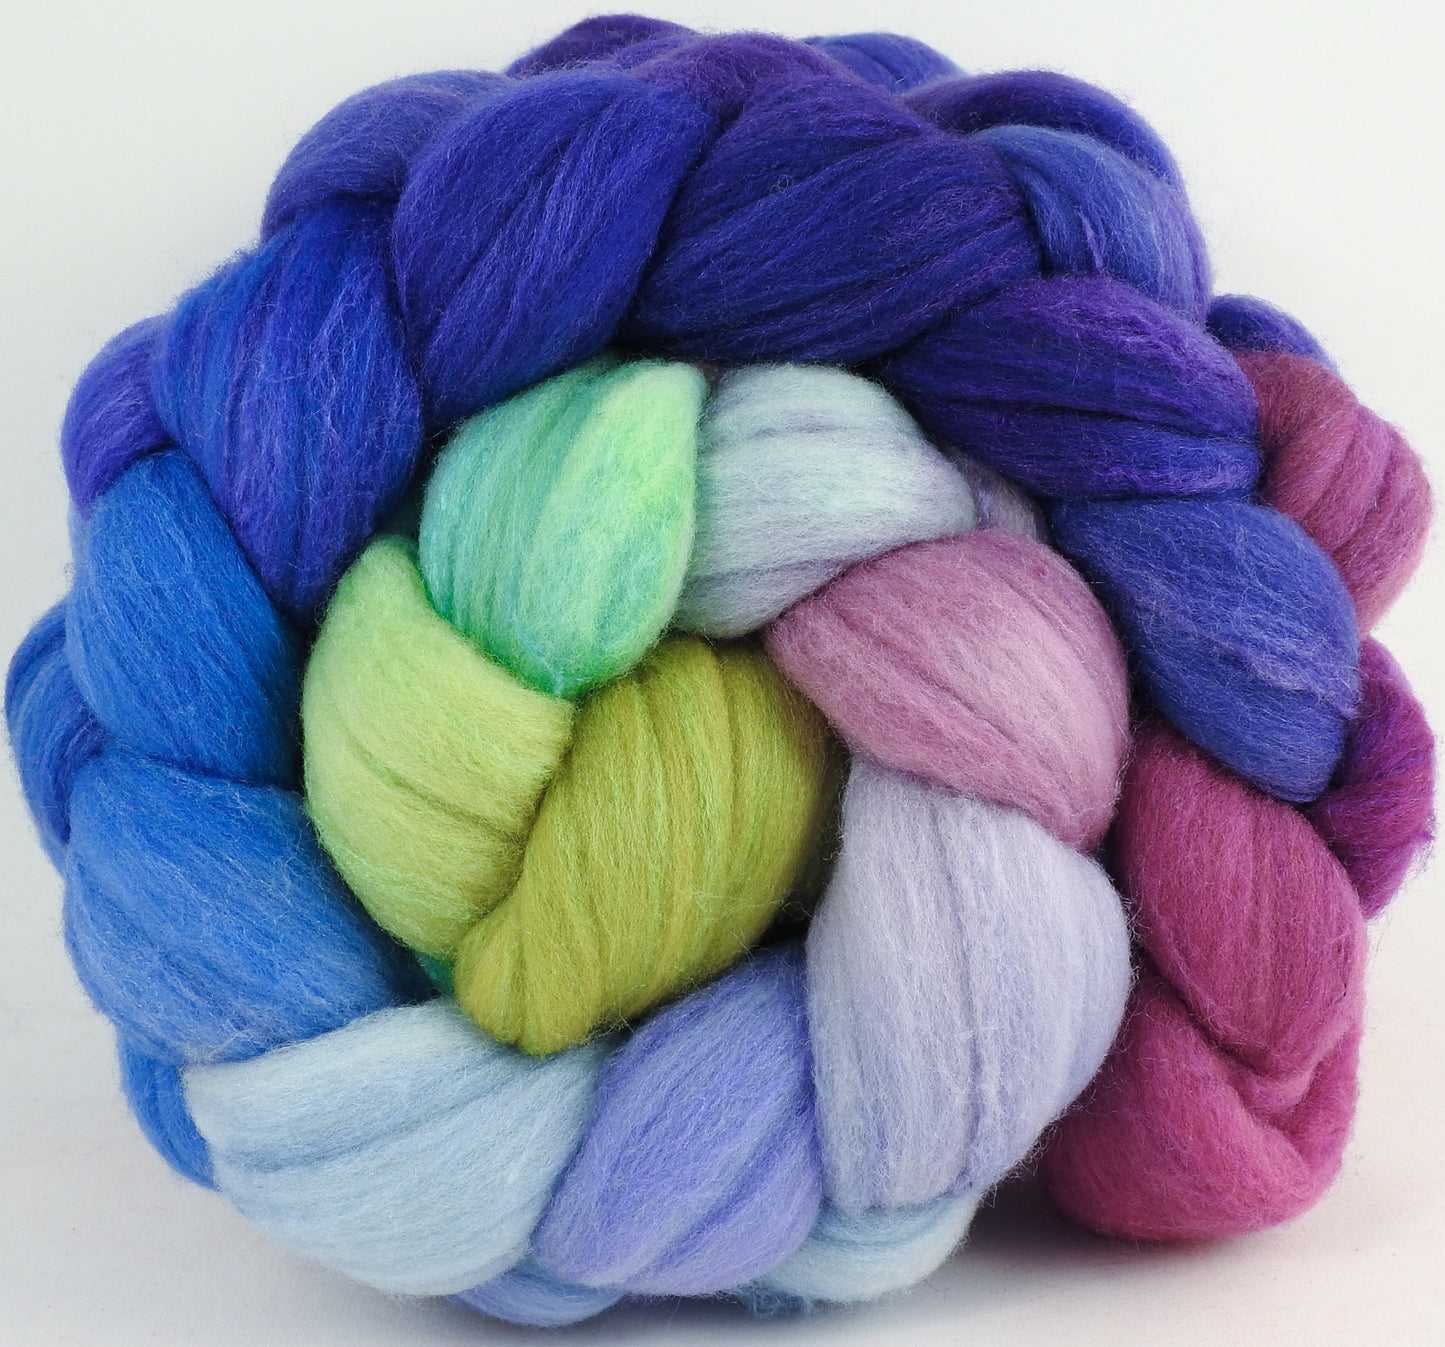 Hand dyed top for spinning -Larkspur (5.3 oz.) Rambouillet /tussah silk (75/25)